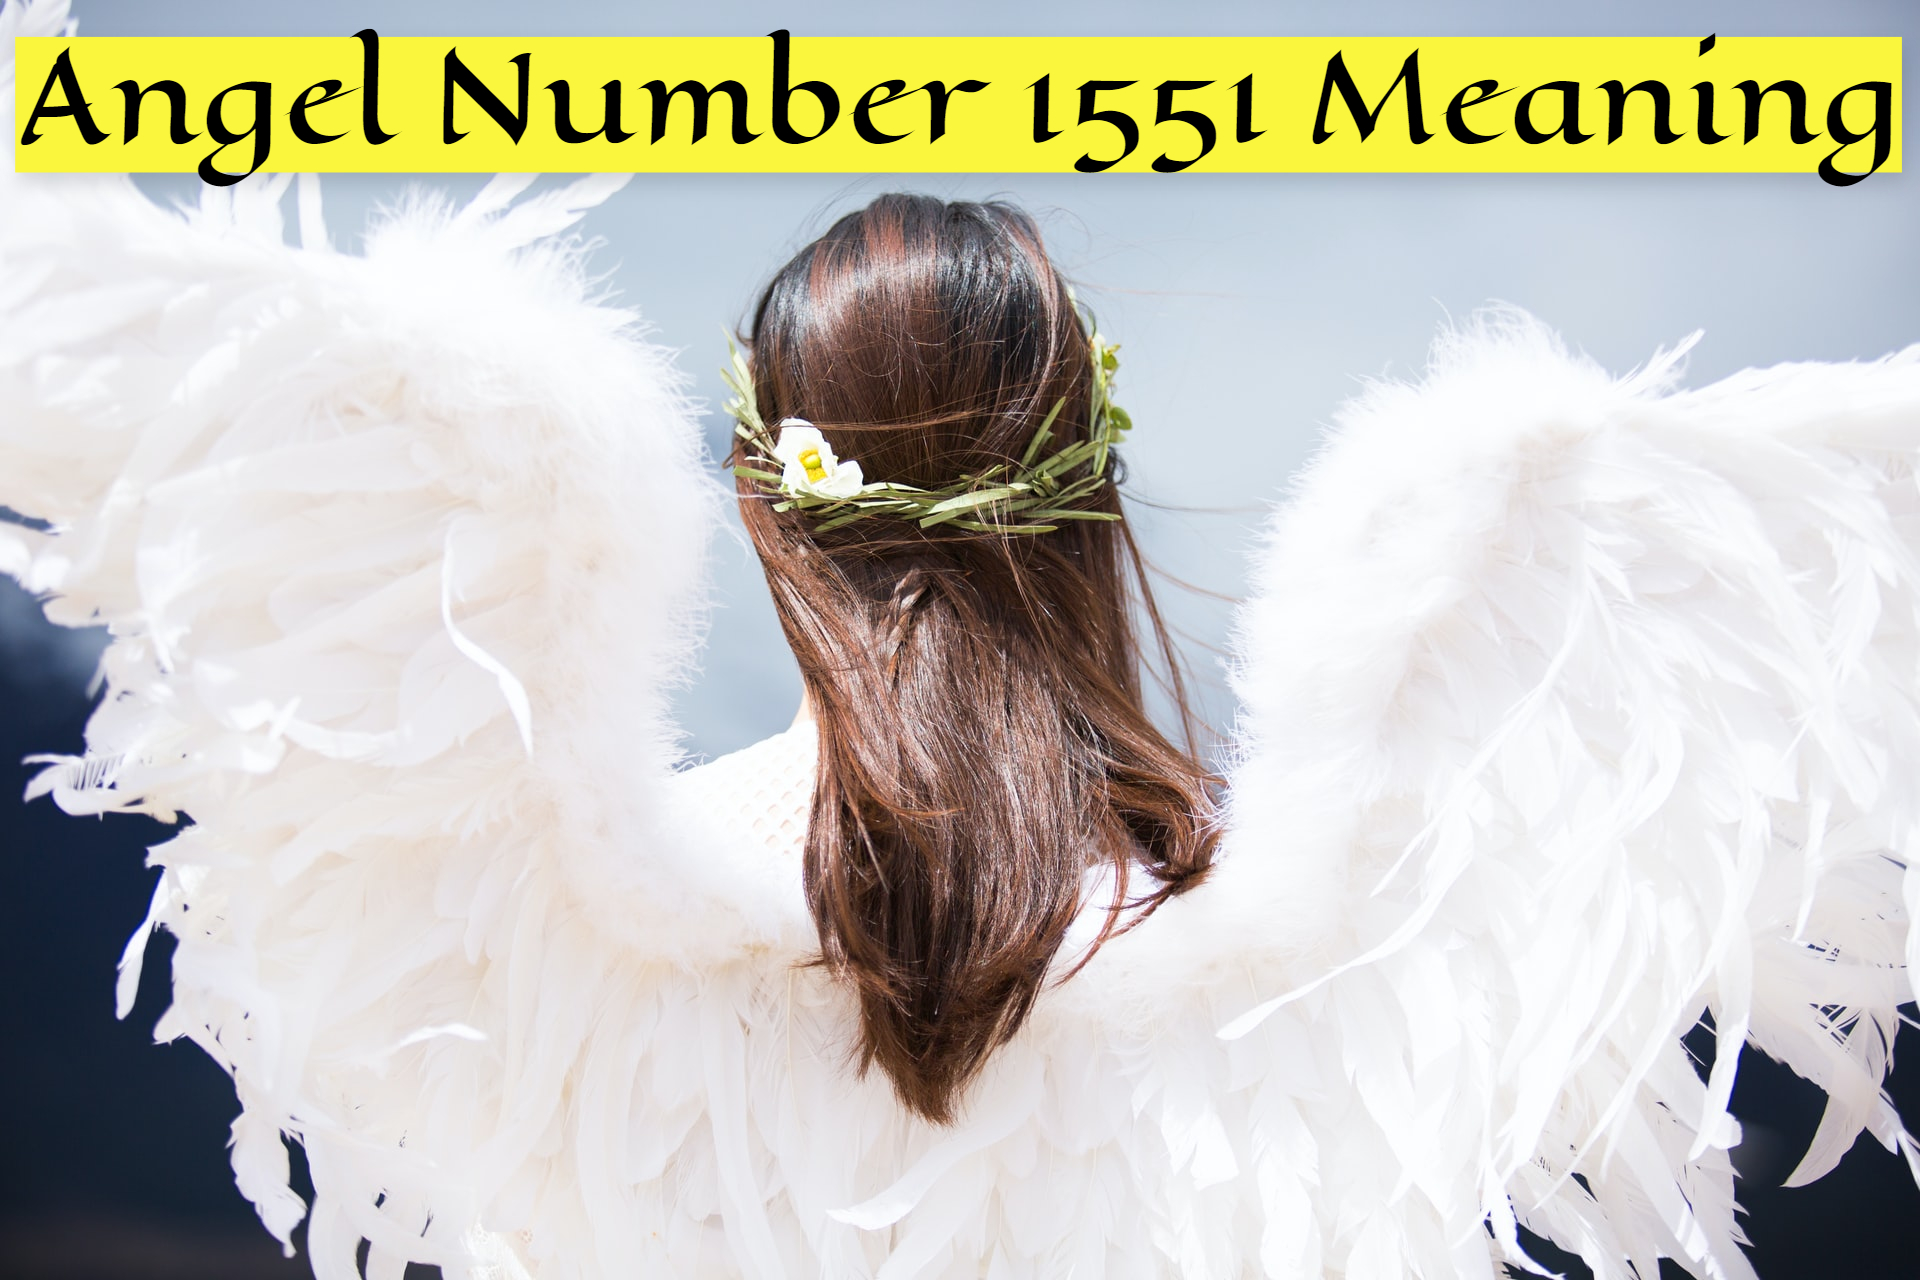 Angel Number 1551 Meaning Represents Your Ambitions And Positive Life Changes